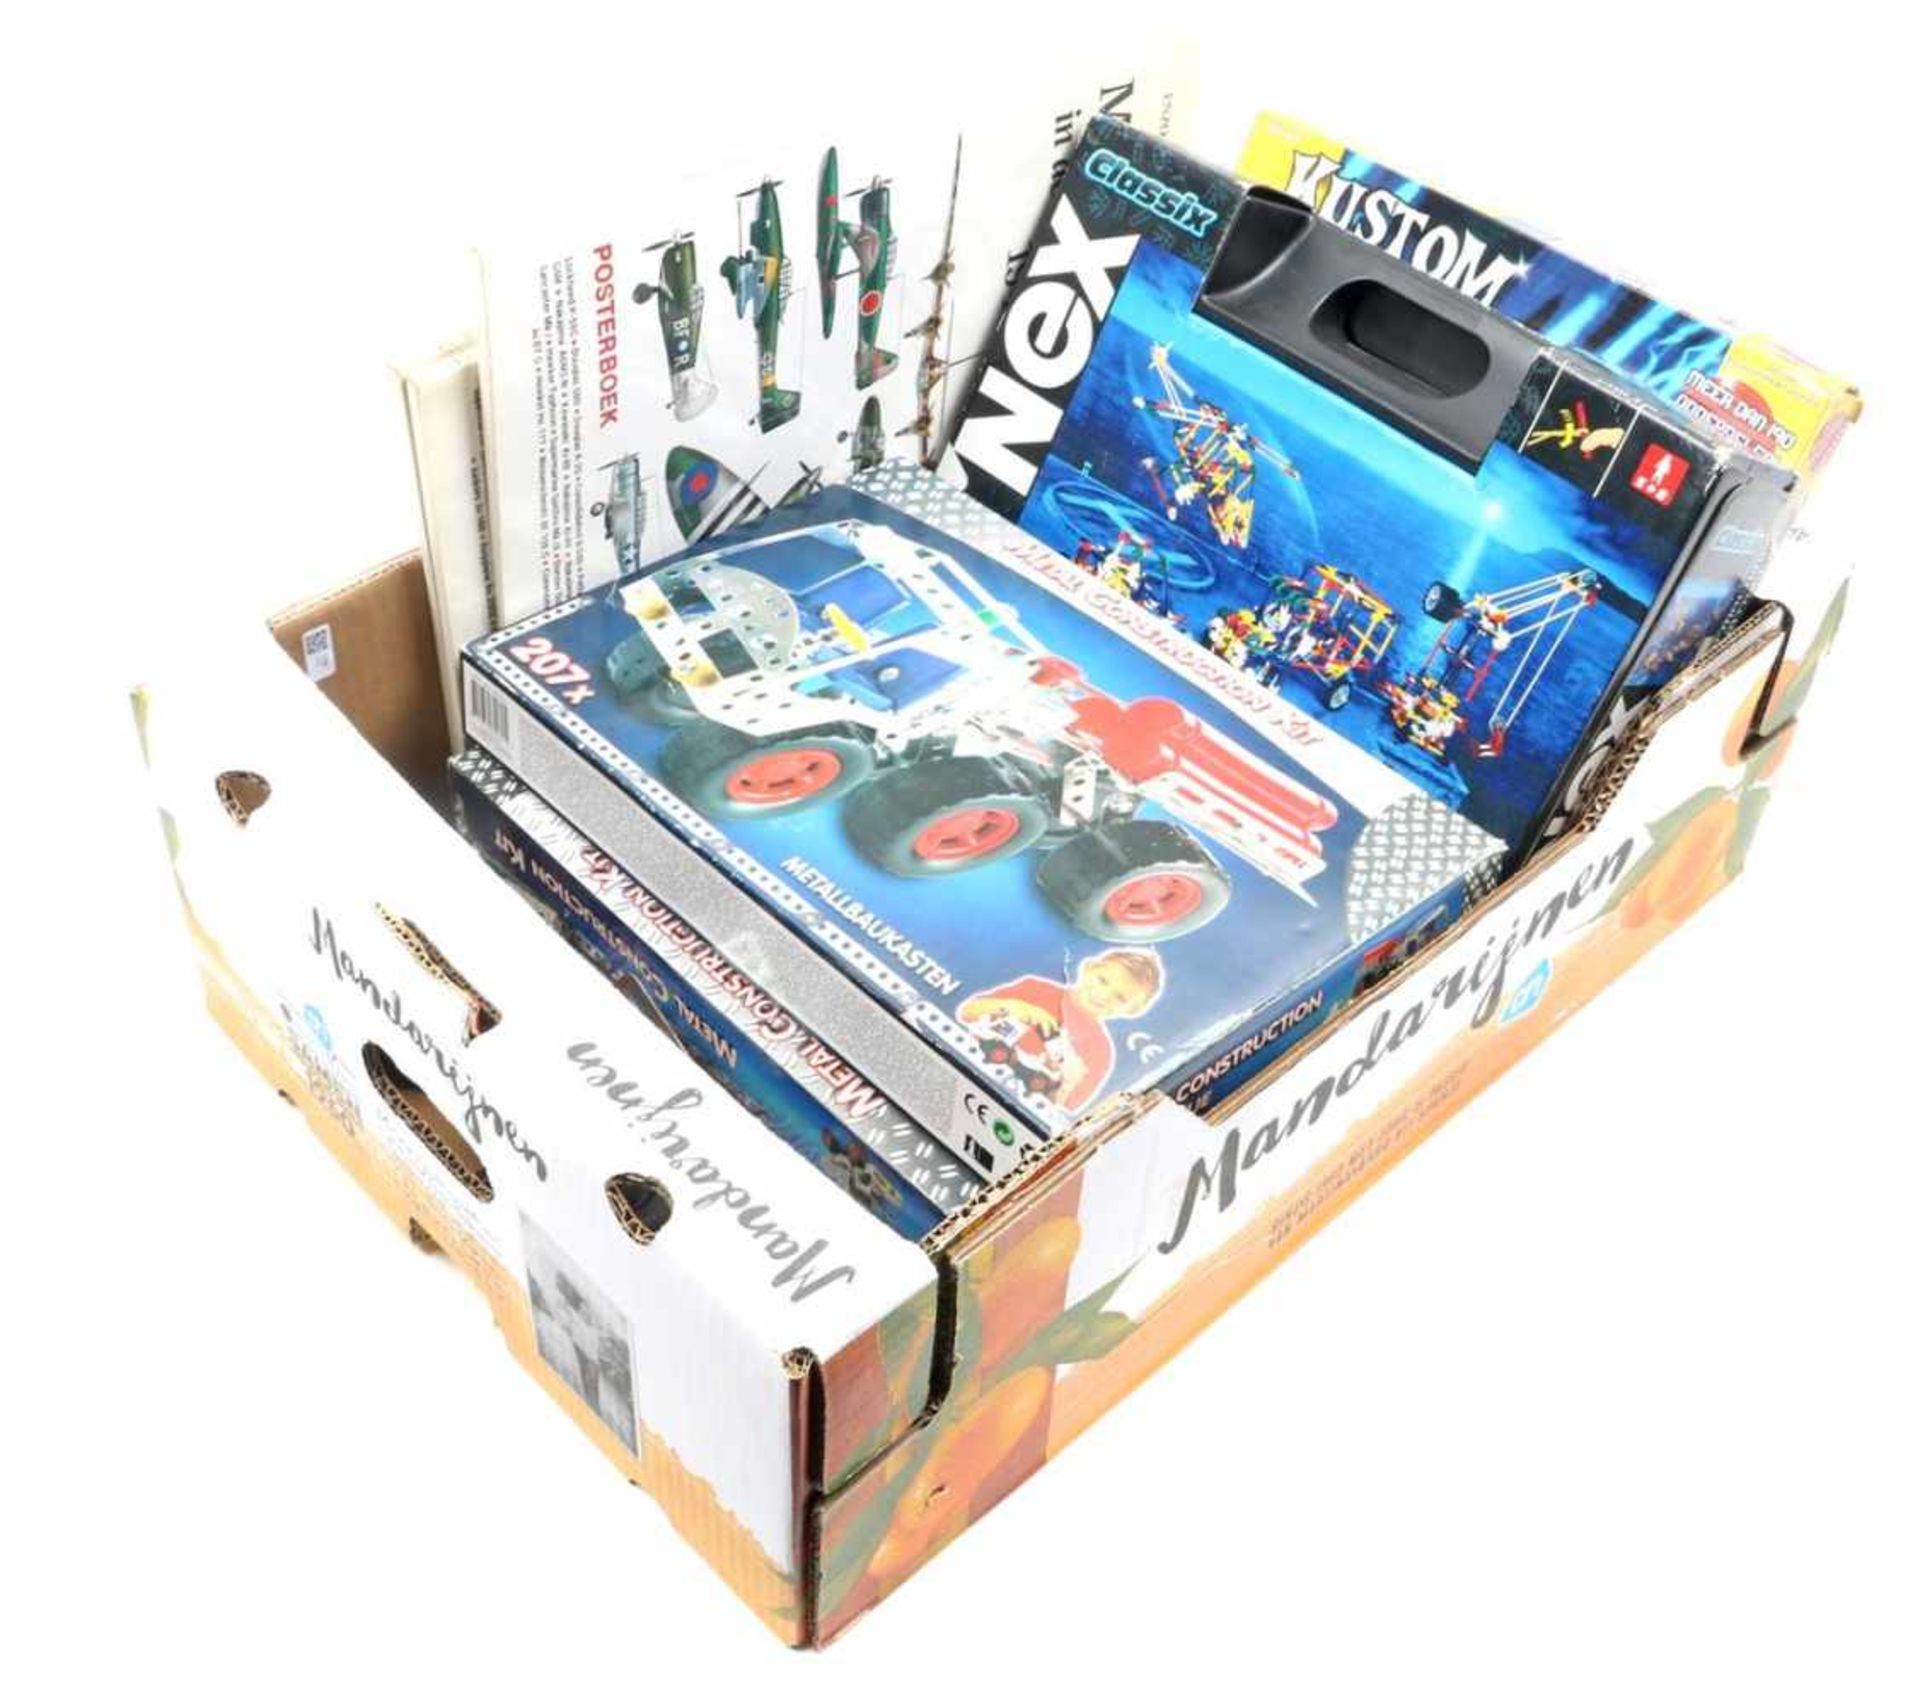 Box with construction toys including KNex and Kustom, 3 poster books about military planes in